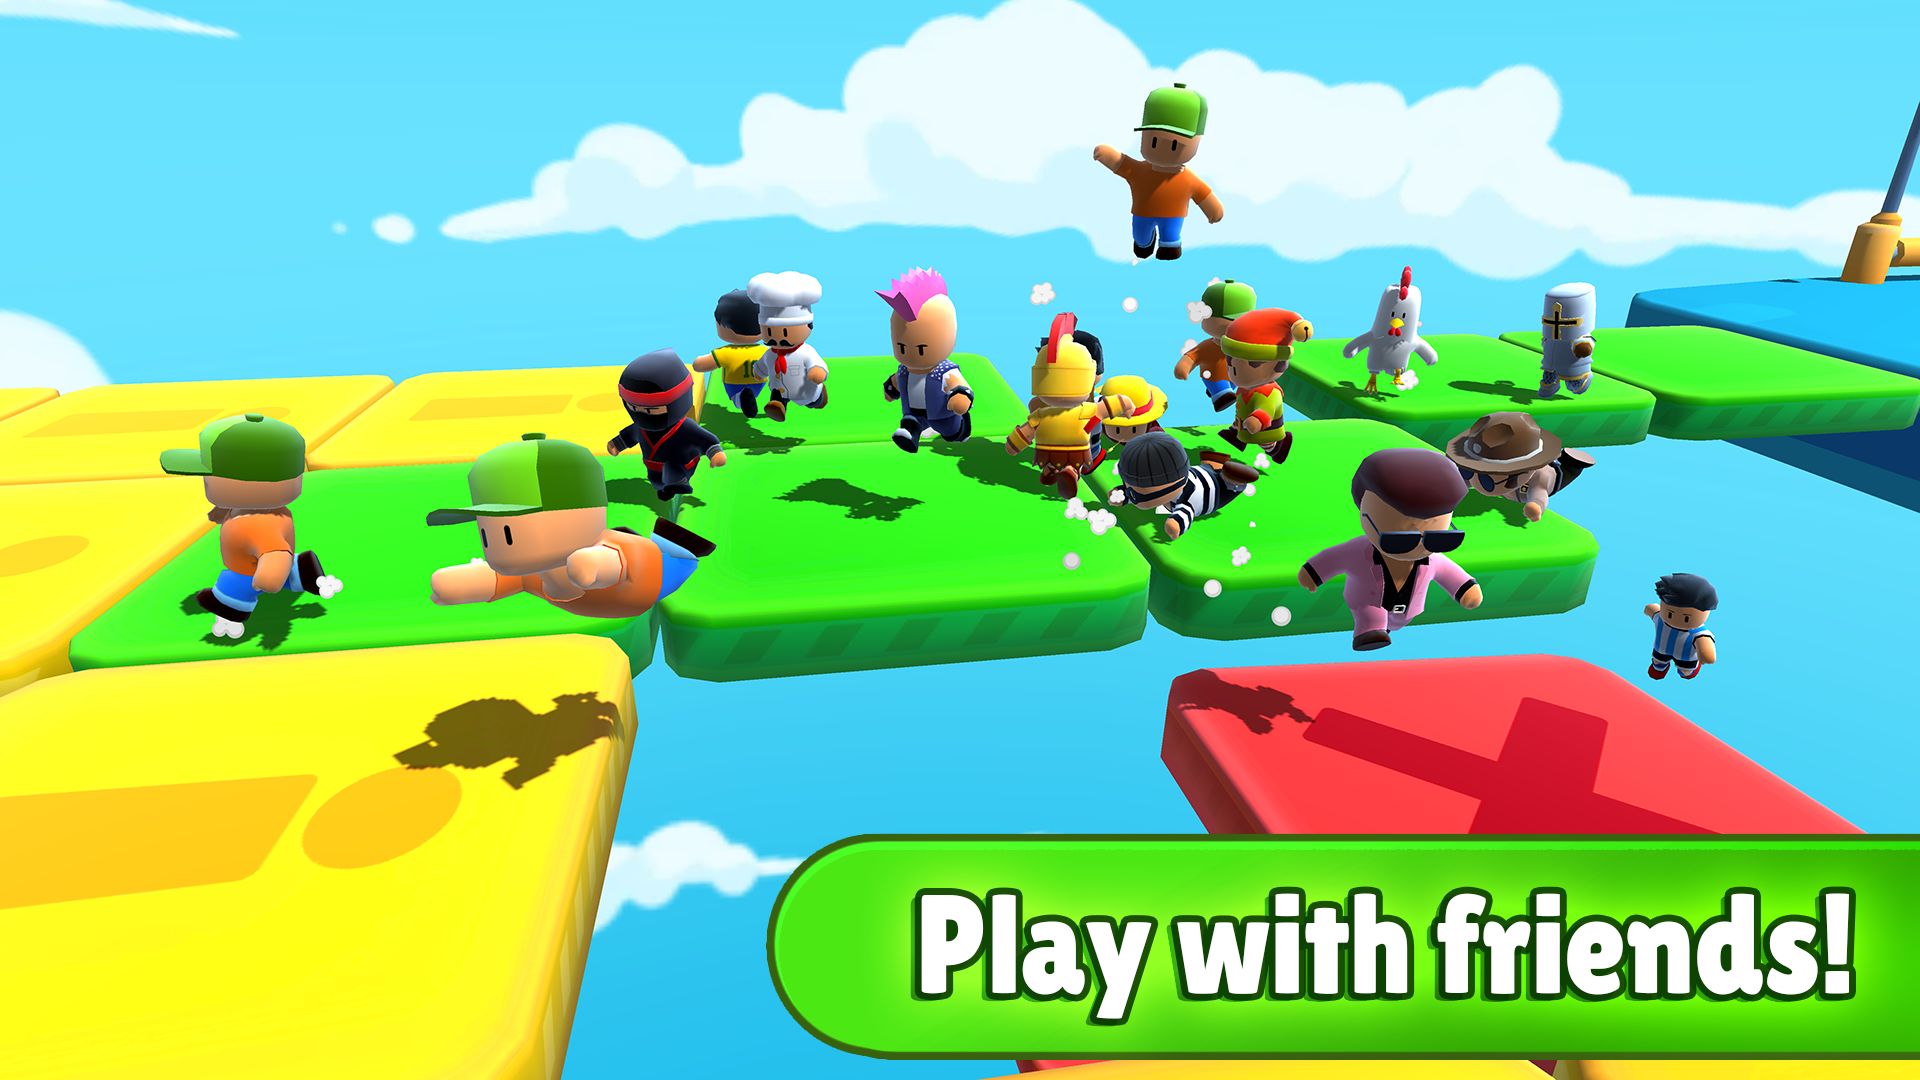 Download do APK de Guide For Stumble Guys: Multiplayer Royale para Android